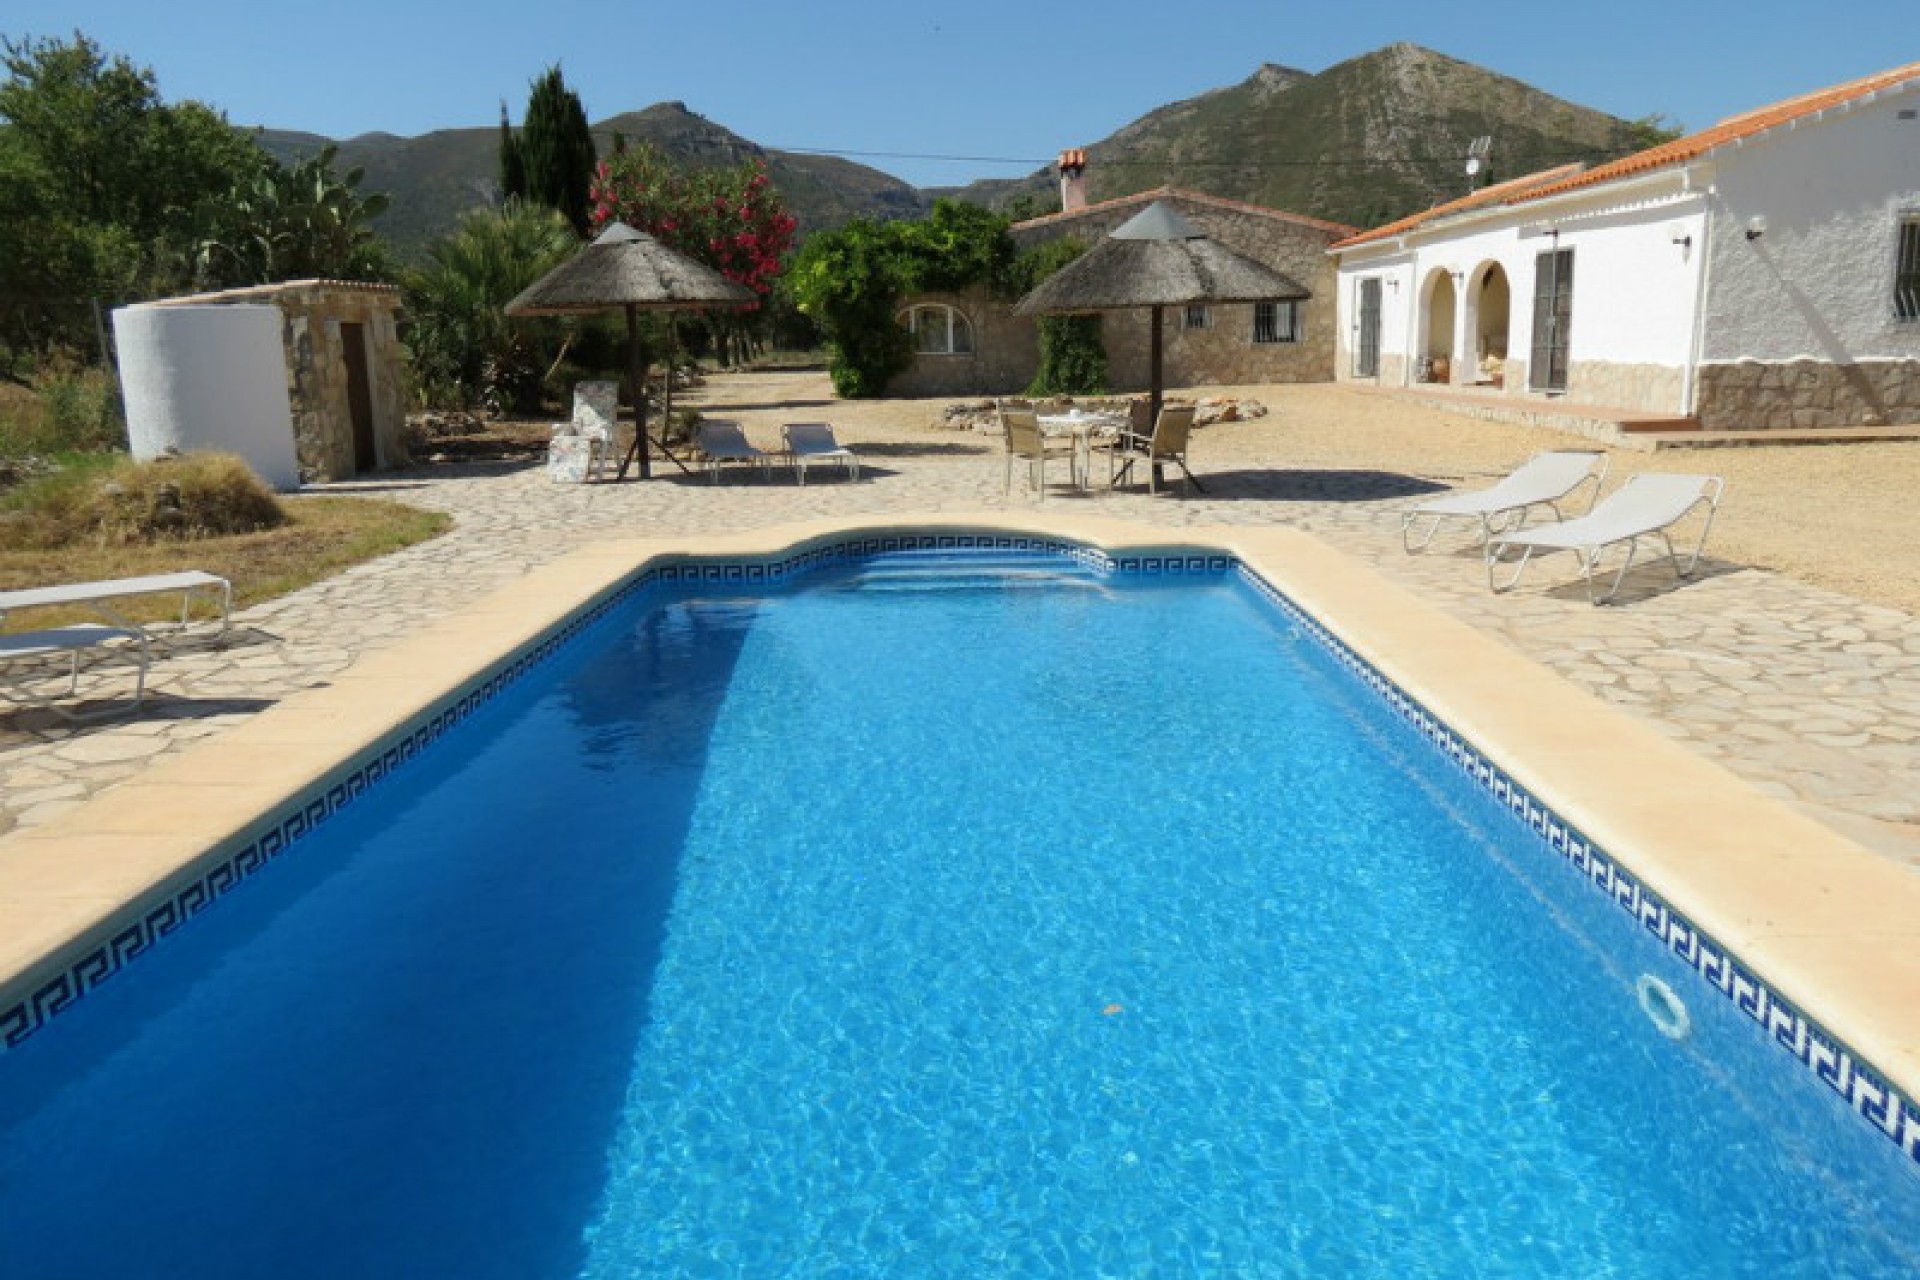 Fincas for sale in the Jalon Valley, Lliber